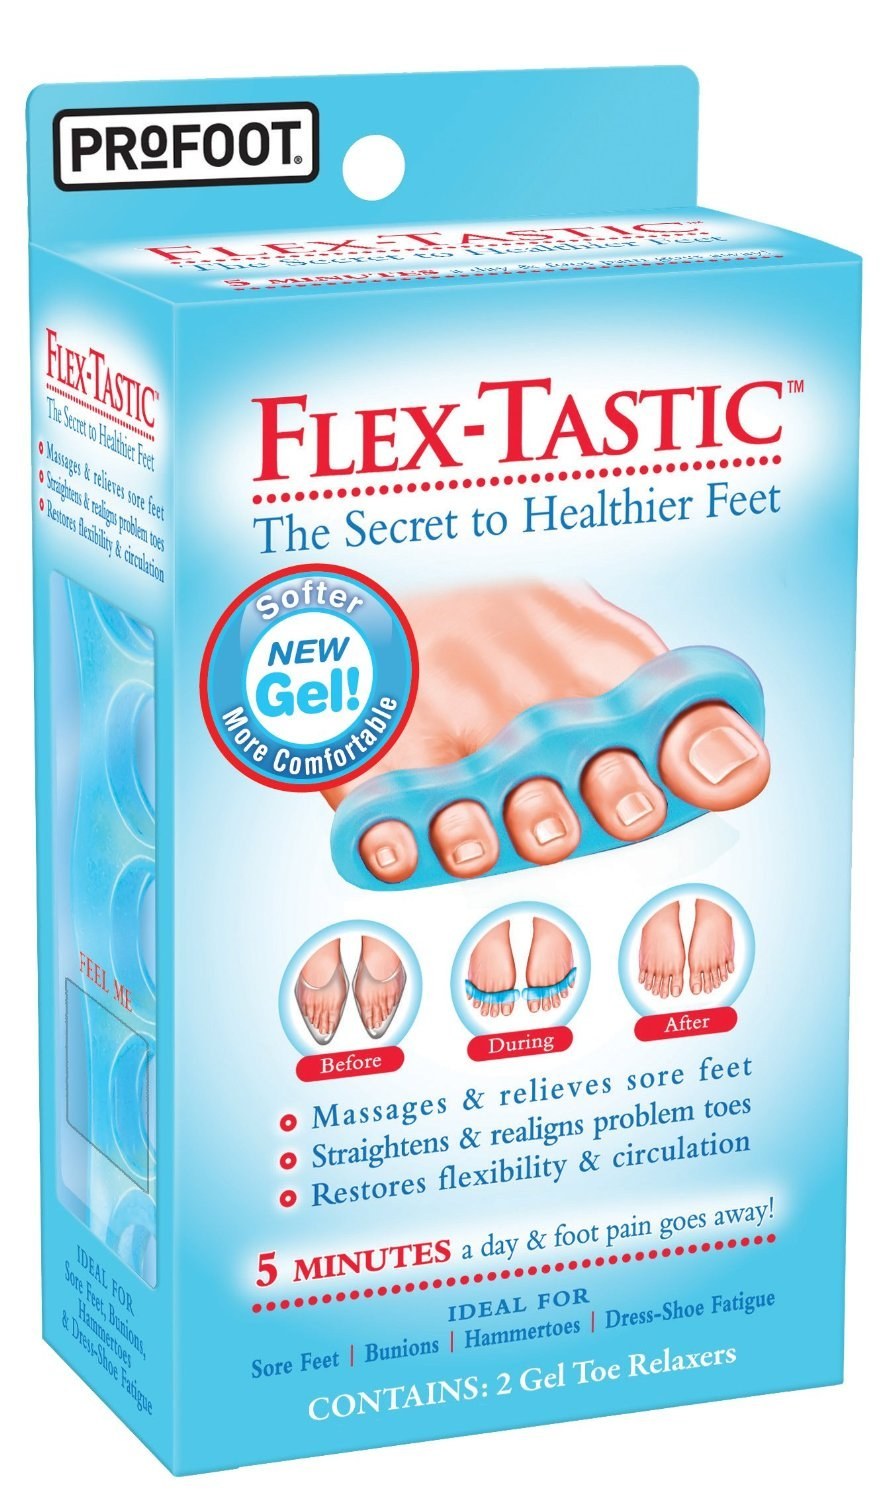 The Flex-Tastic exerciser separates, strengthens and helps realign your toes.